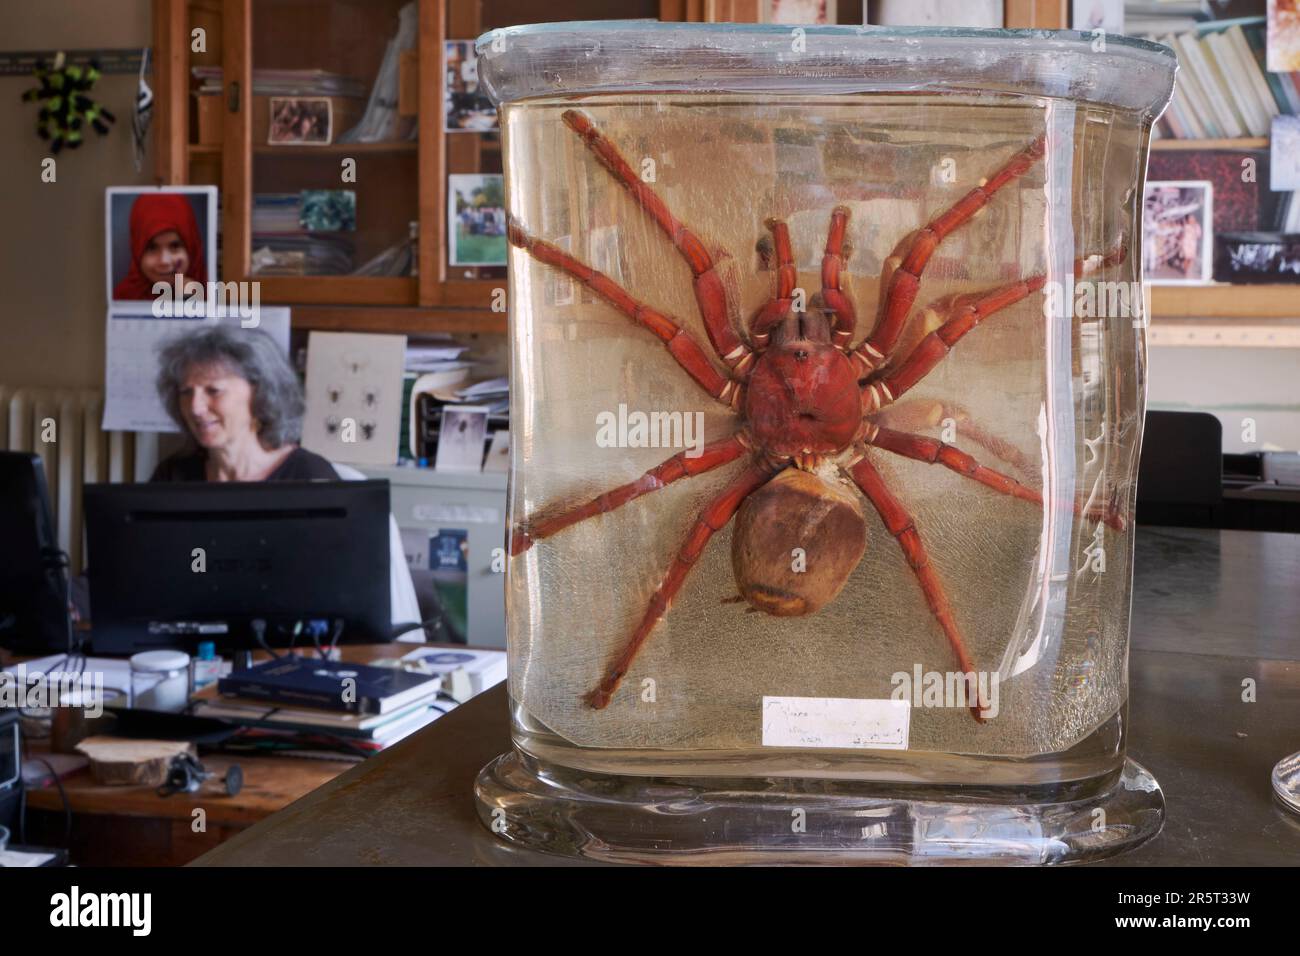 France, Paris, National Museum of Natural History, Laboratory of Arachnology, Christine Rollard, teacher researcher araneologist, responsible for the conservation of the spider collection, Theraphosa blondi (Goliath birdeater or Goliath tarantula, one of the largest known mygalomorph spider species with 30 cm wingspan Stock Photo